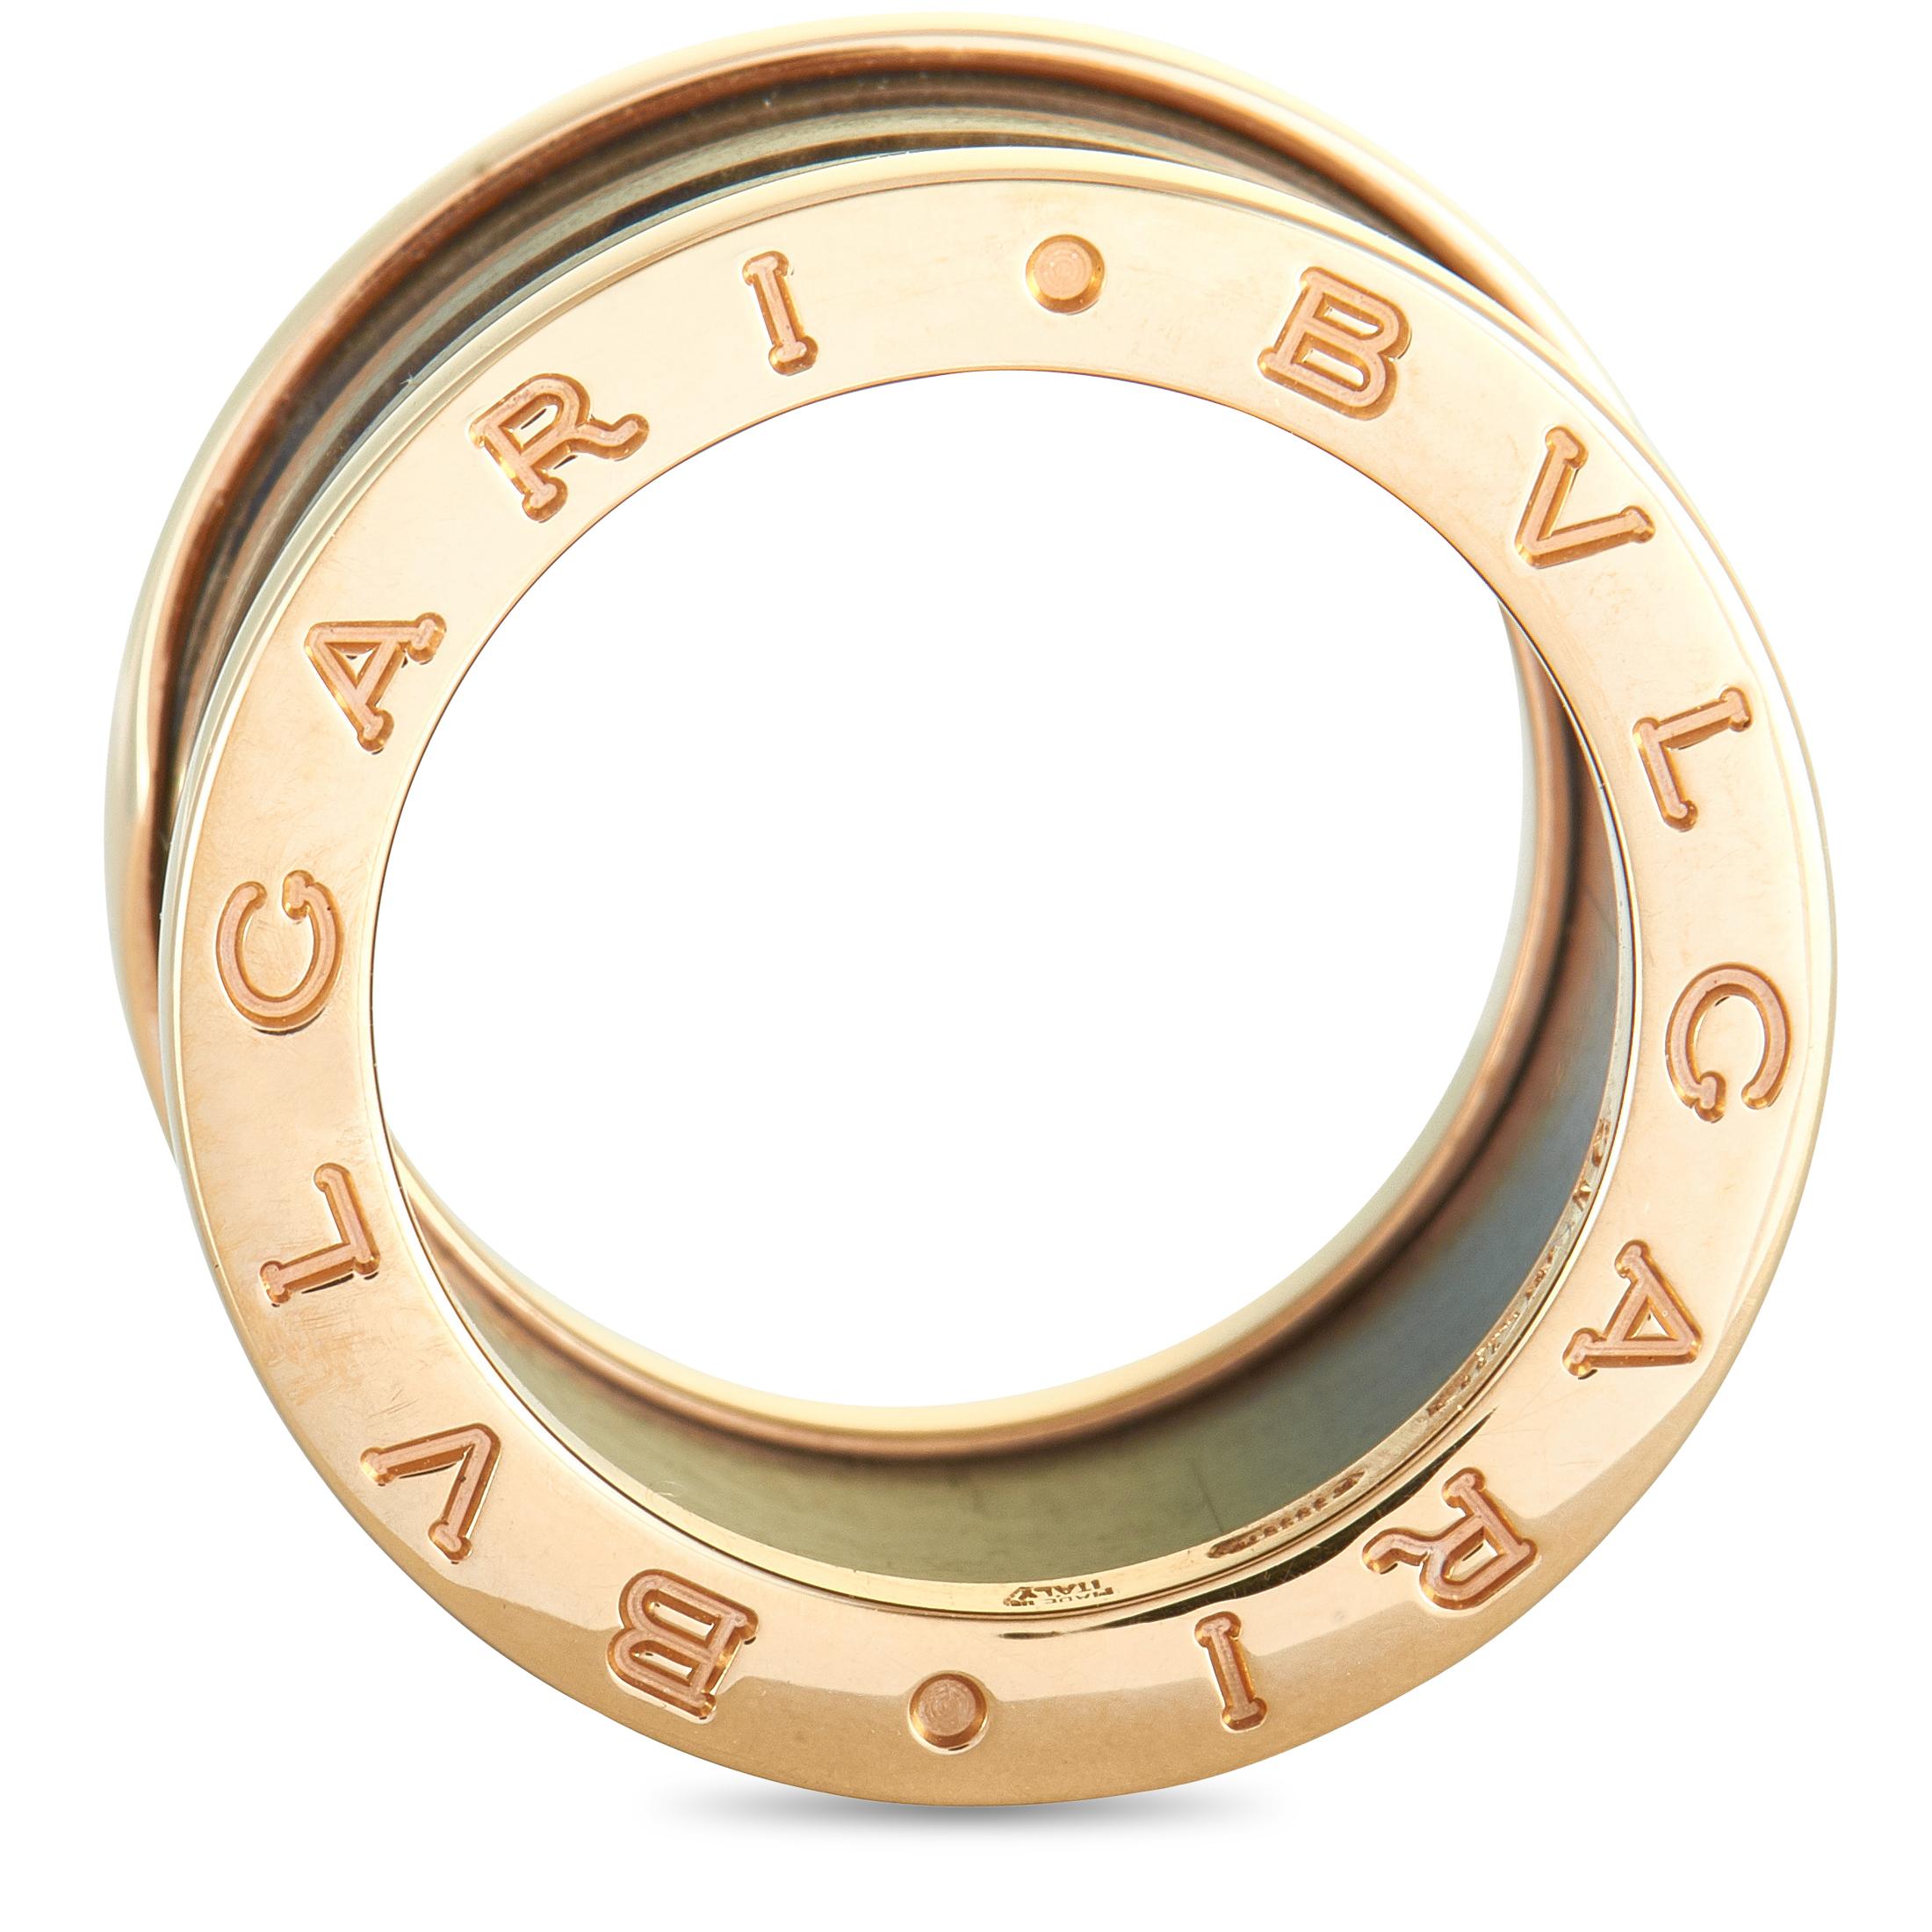 The Bvlgari “B.zero1” ring is made out of 18K rose gold and brown ceramic and weighs 7.2 grams, boasting band thickness of 12 mm.
Ring Size: 5.25

This jewelry piece is offered in brand new condition and includes the manufacturer’s box and papers.